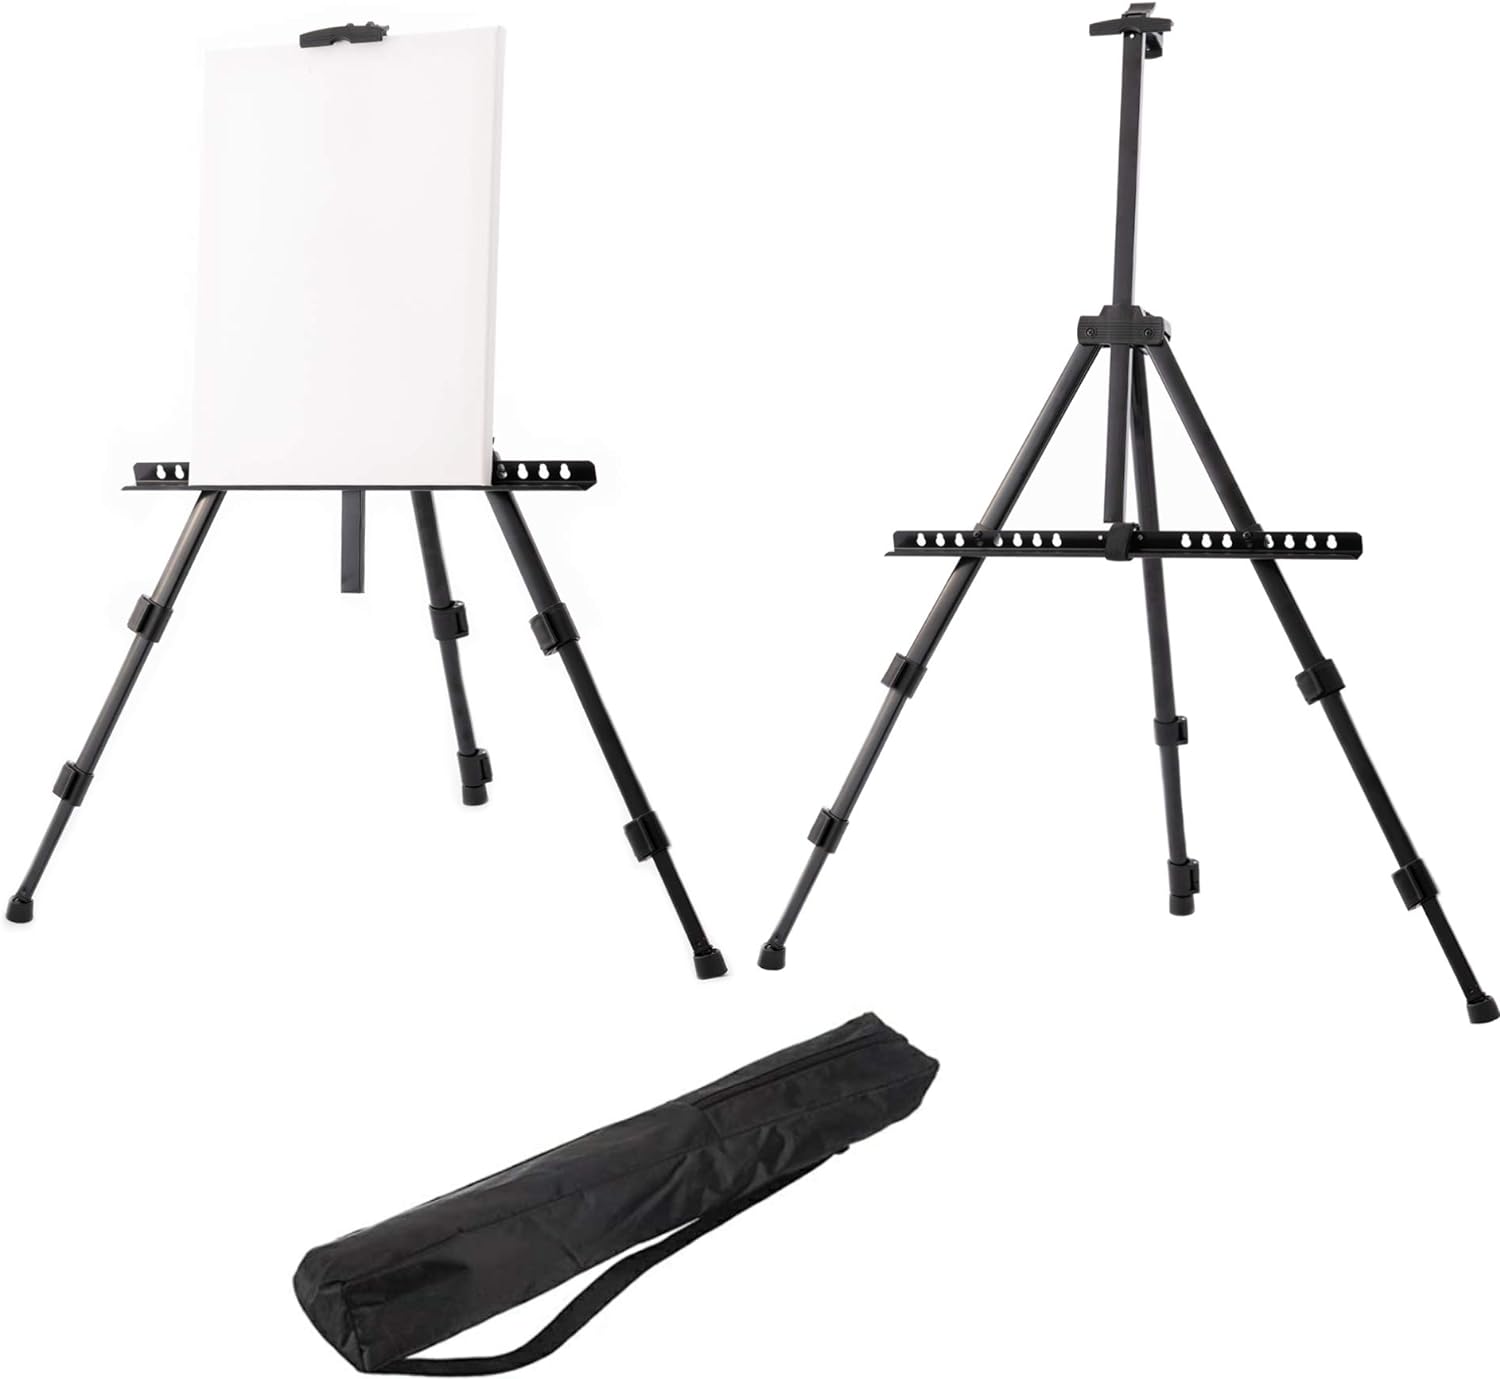 ADEPTNA NEW HEAVY DUTY FOLDING ARTIST TELESCOPIC FIELD STUDIO PAINTING CANVAS EASEL TRIPOD DISPLAY STAND WITH CARRY BAG